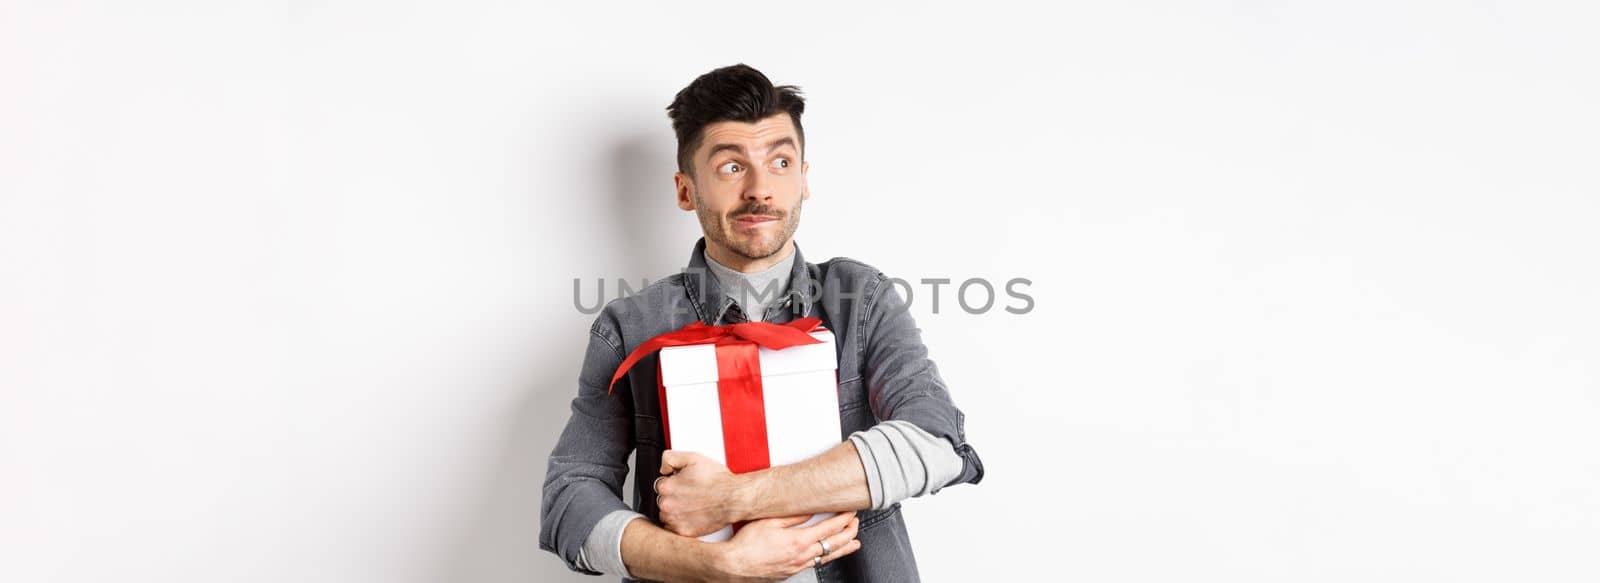 Excited man hugging romantic gift for girlfriend, waiting for valentines date with lover, looking at empty space logo with happy face, standing on white background.